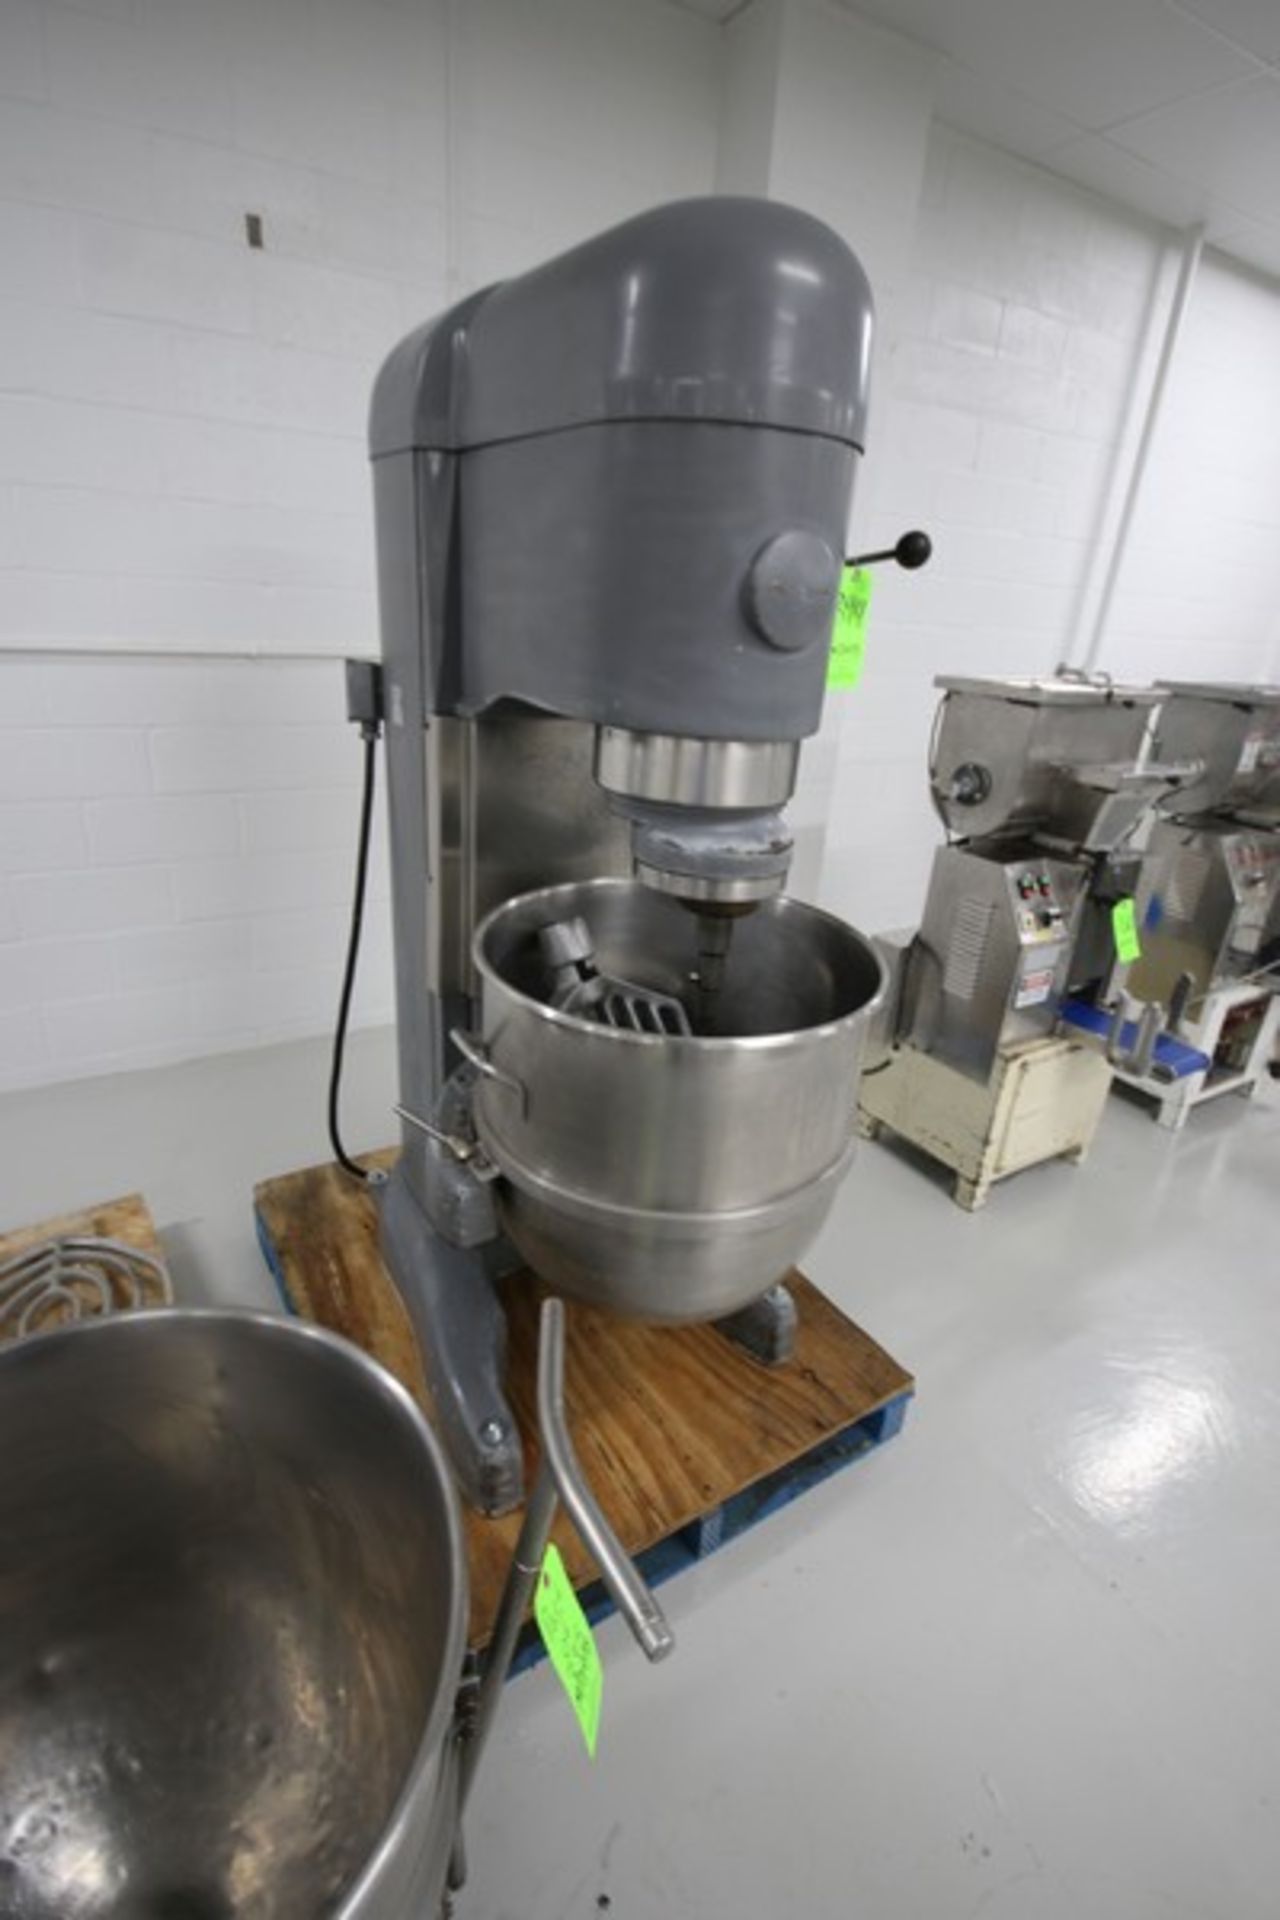 Hobart Mixer, M/N V-1401, S/N 11-1000-351, 200 Volts, 3 Phase, with S/S Mixing Bowl with Whip - Image 2 of 5